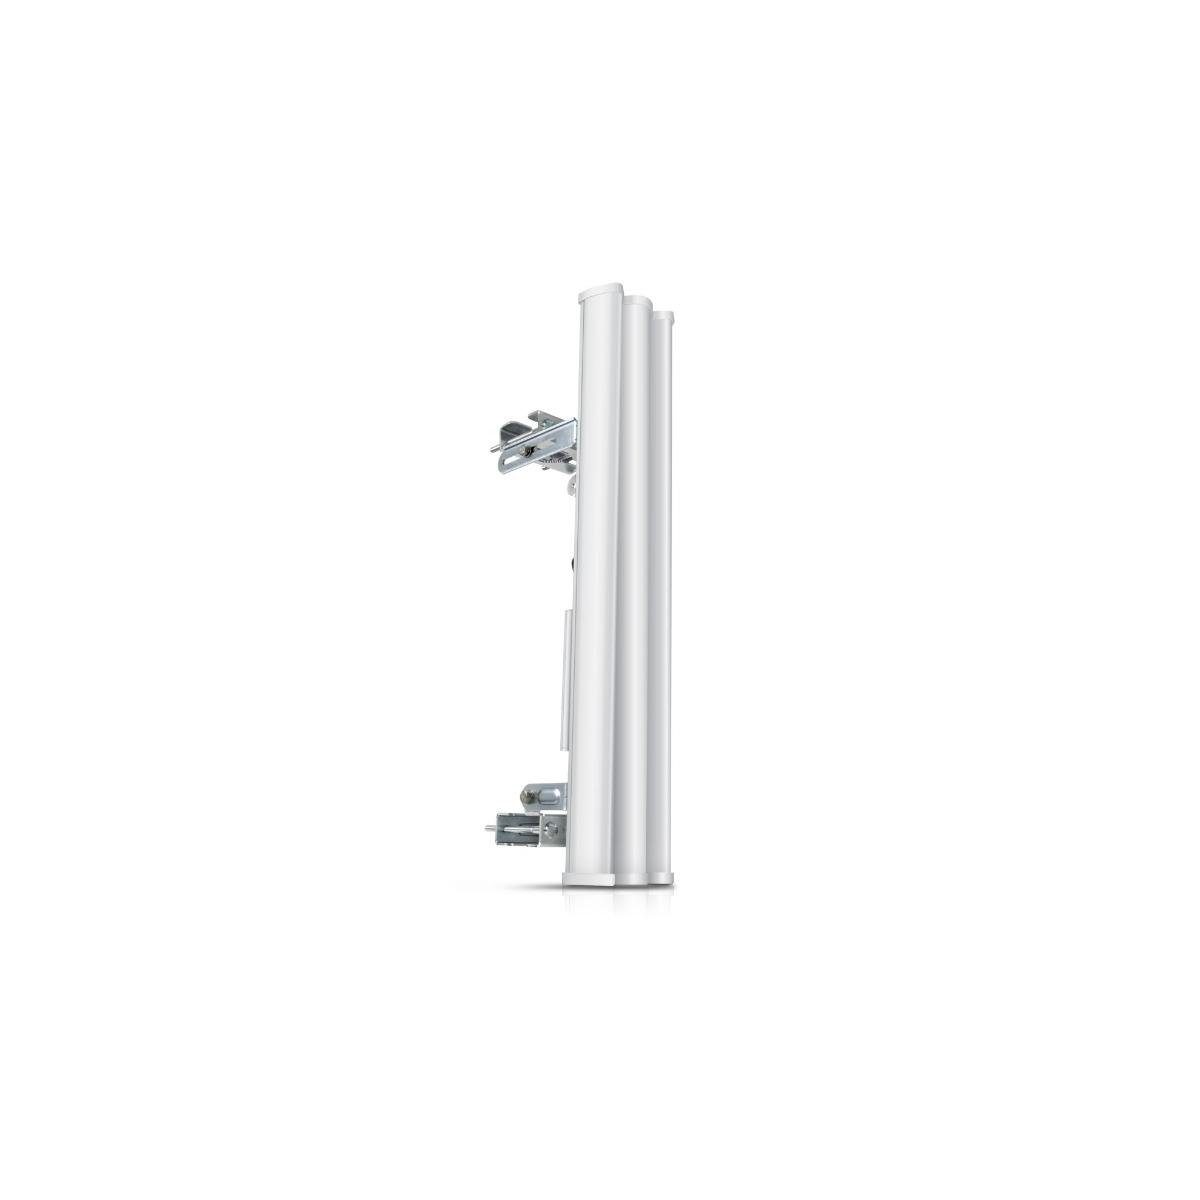 2x2 Sector GHz Ubiquiti 5 AirMax MIMO - WLAN-Antenne Networks AM-5G19-120 Antenne,